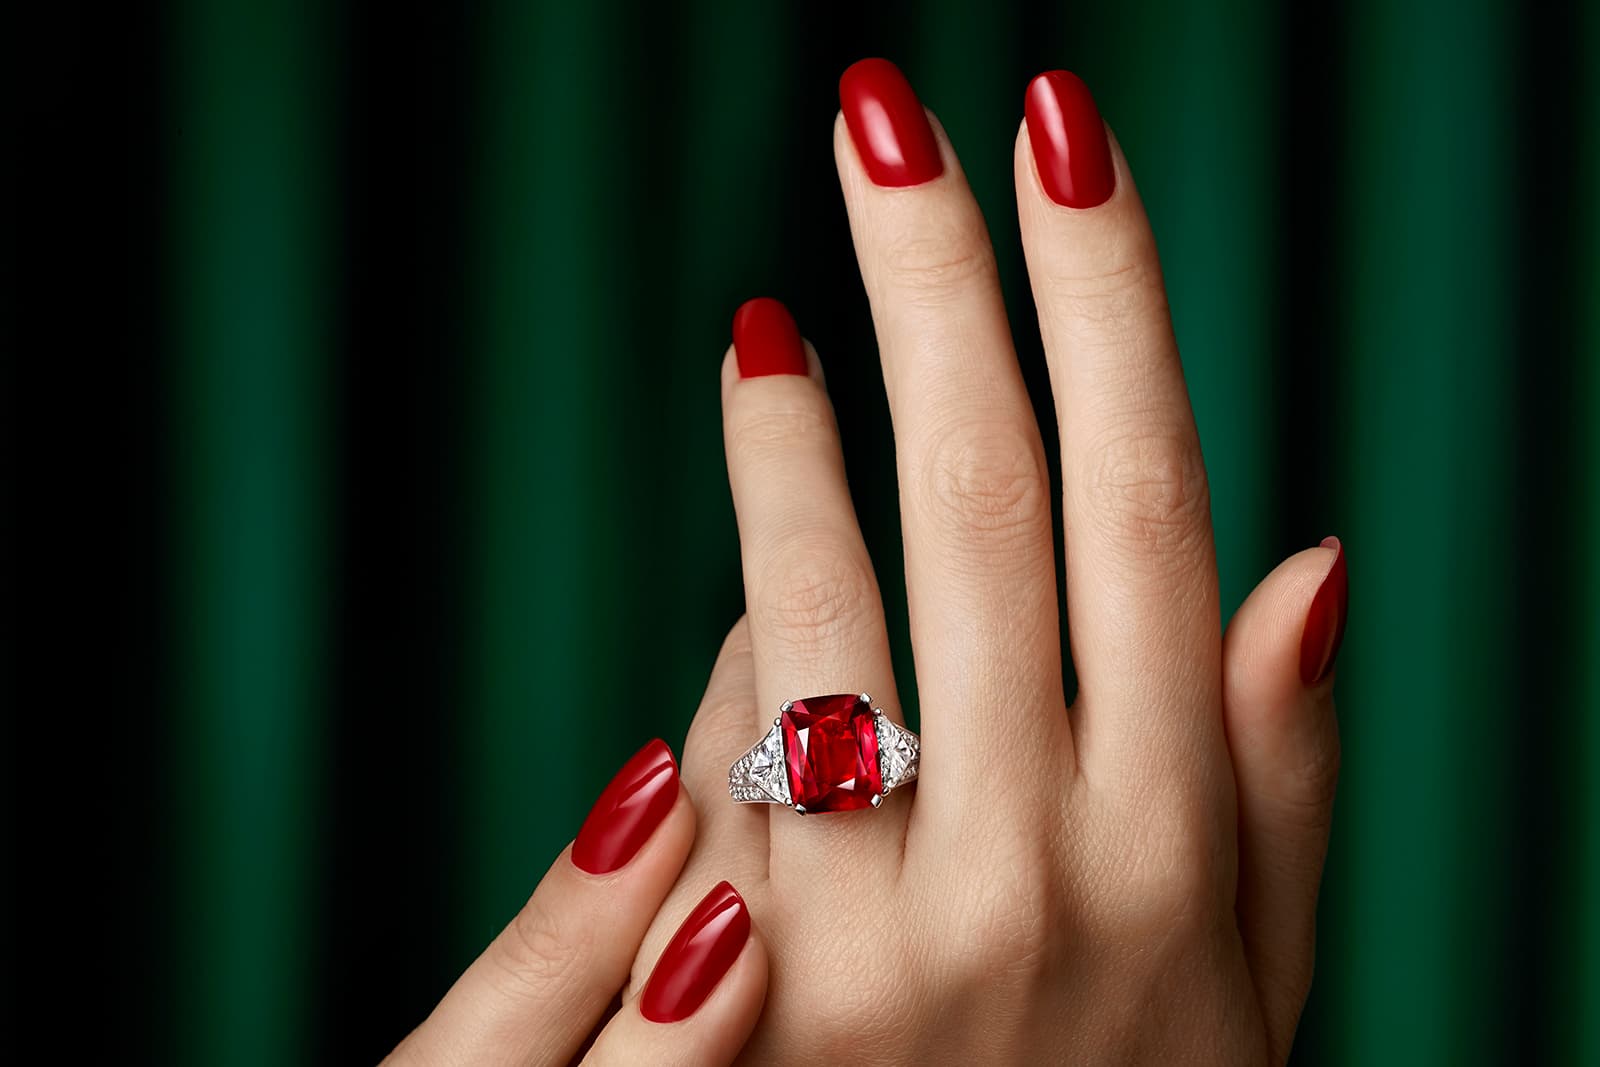 The Graff Ruby displays a unique combination of characteristics – old mine Burmese origin, weight, purity, clarity and colour – that together account for its importance